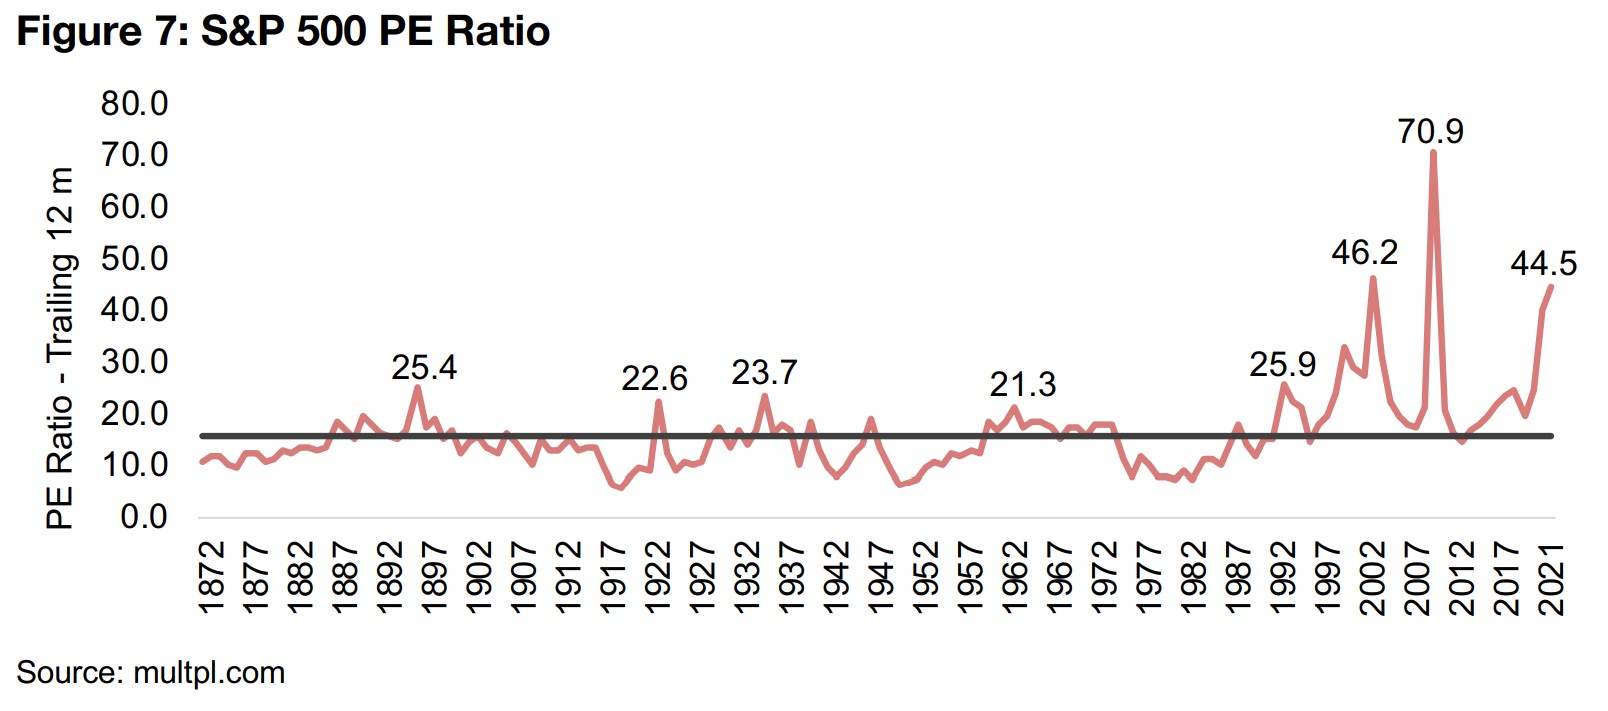 Equity market valuations are at very high levels historically